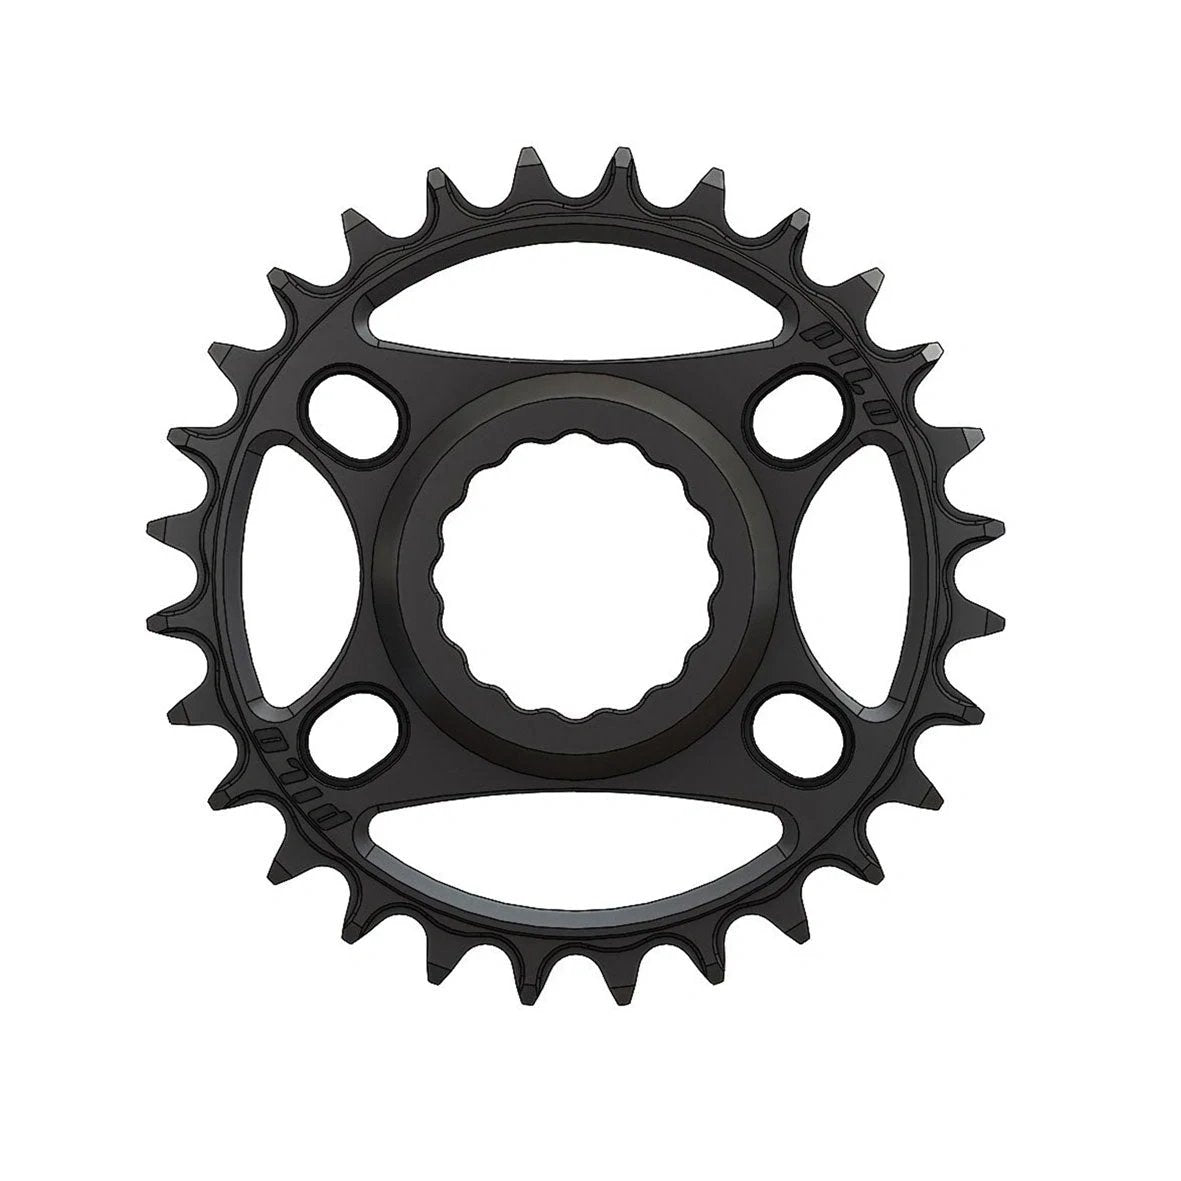 Pilo 28T Race Hg+ Chainring For Cranks - High Performance Chain Rings